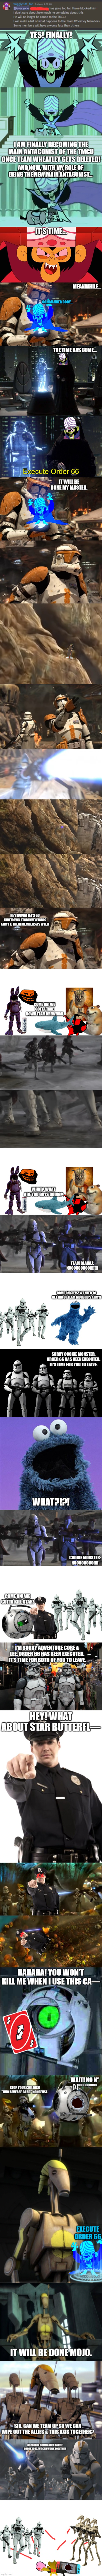 Order 66 (Part 1) | image tagged in order 66 | made w/ Imgflip meme maker